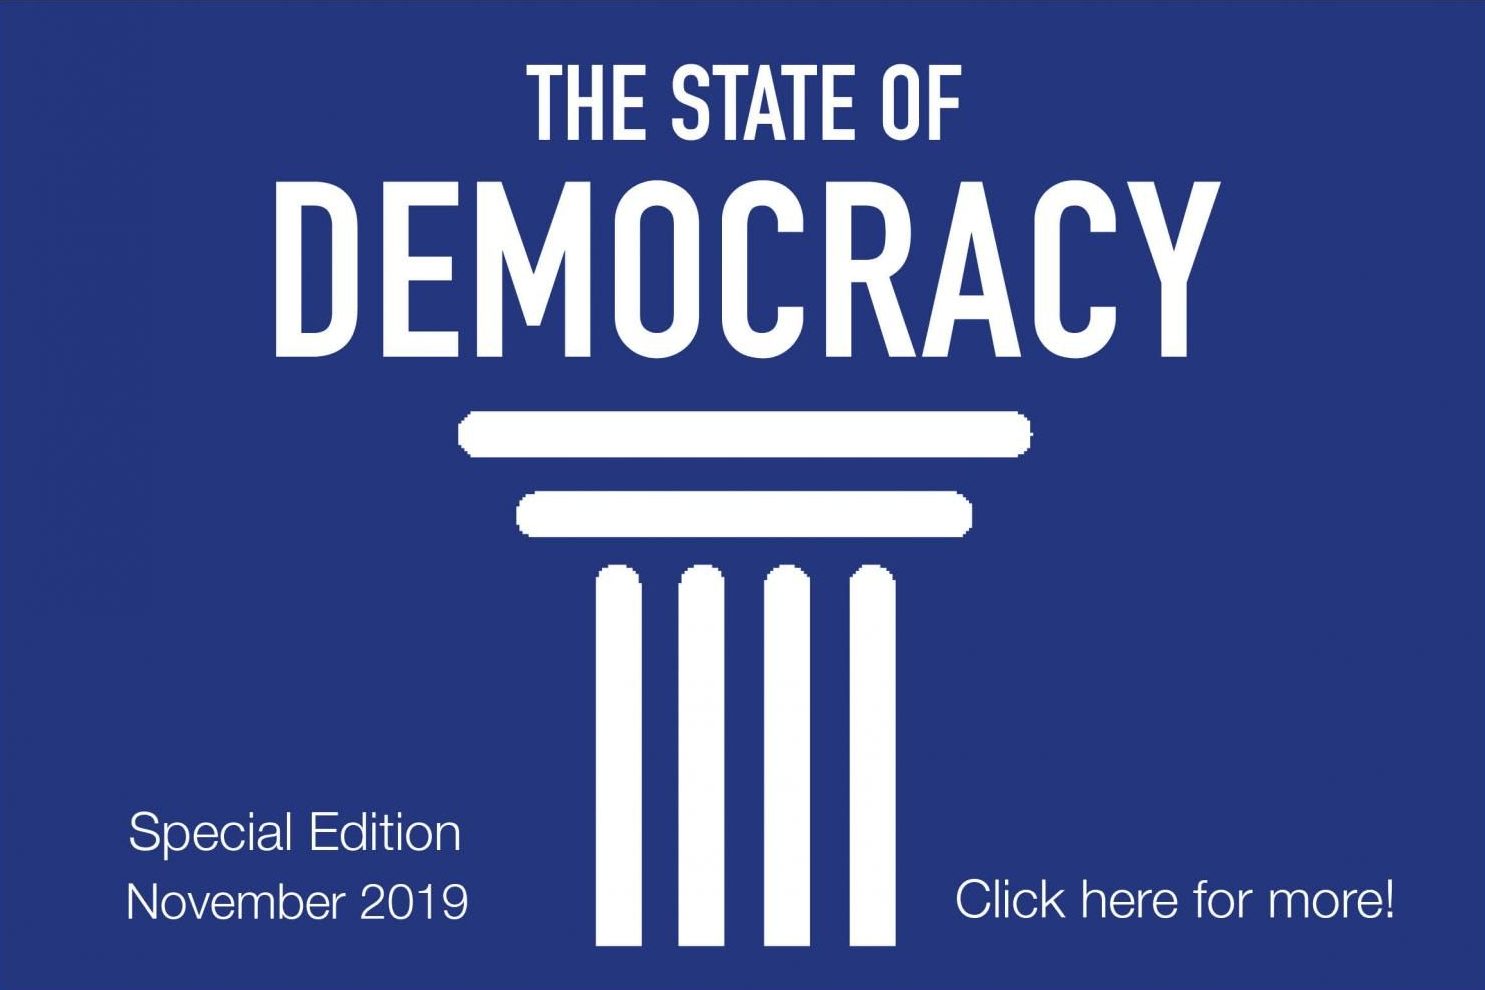 Special Edition: The State of Democracy